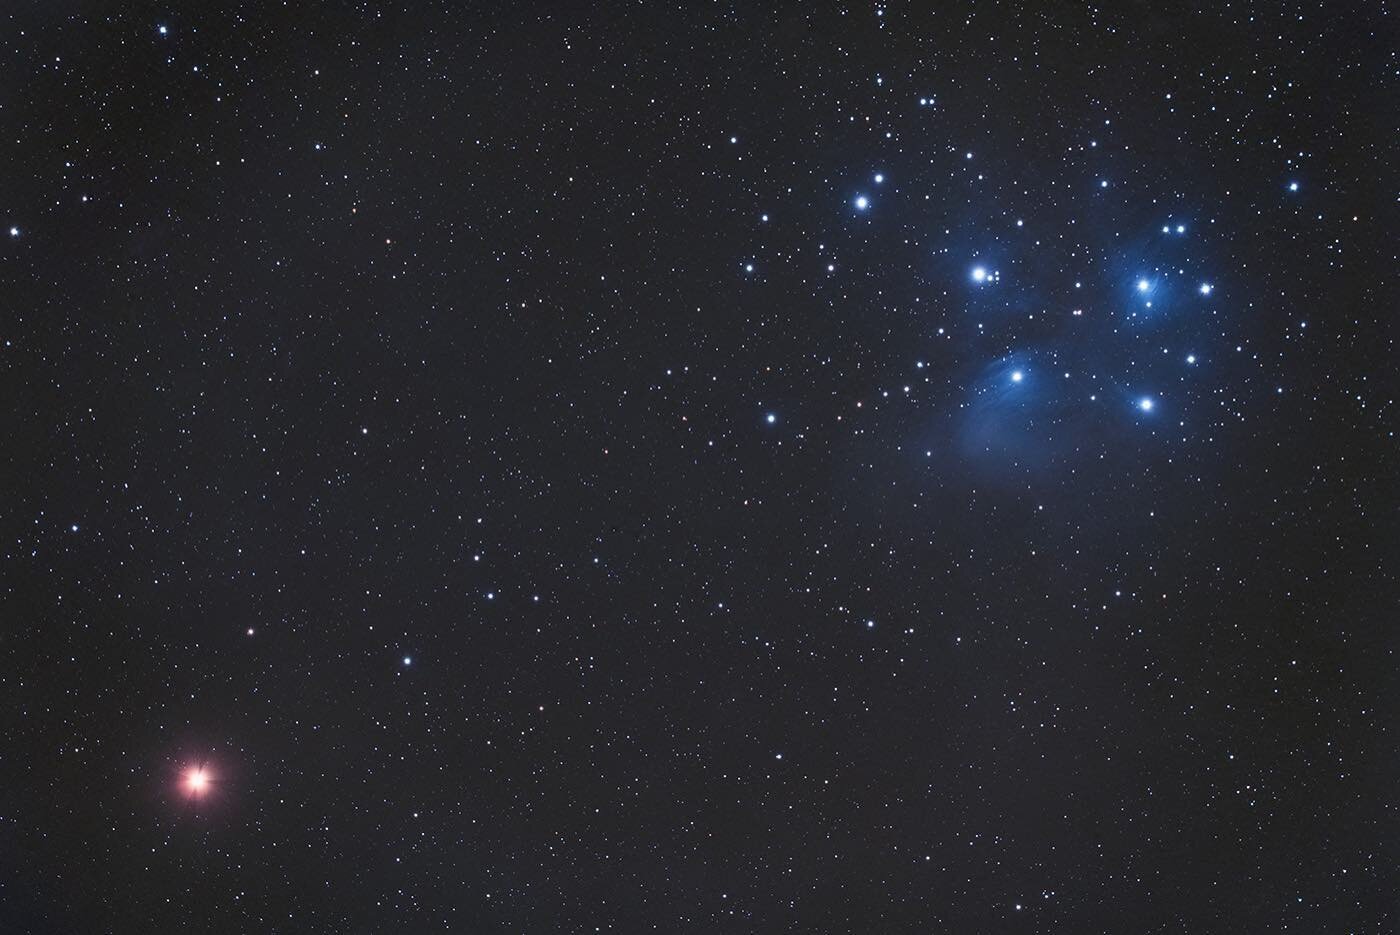 Pleiades and Mars conjunction on March 4. I hope you caught the conjunction. It was a spectacular sight in binoculars. I highlighted this and many other Astro events for 2021 on my YouTube page. #pleiades #mars #conjunction #canonphotography #canoneo